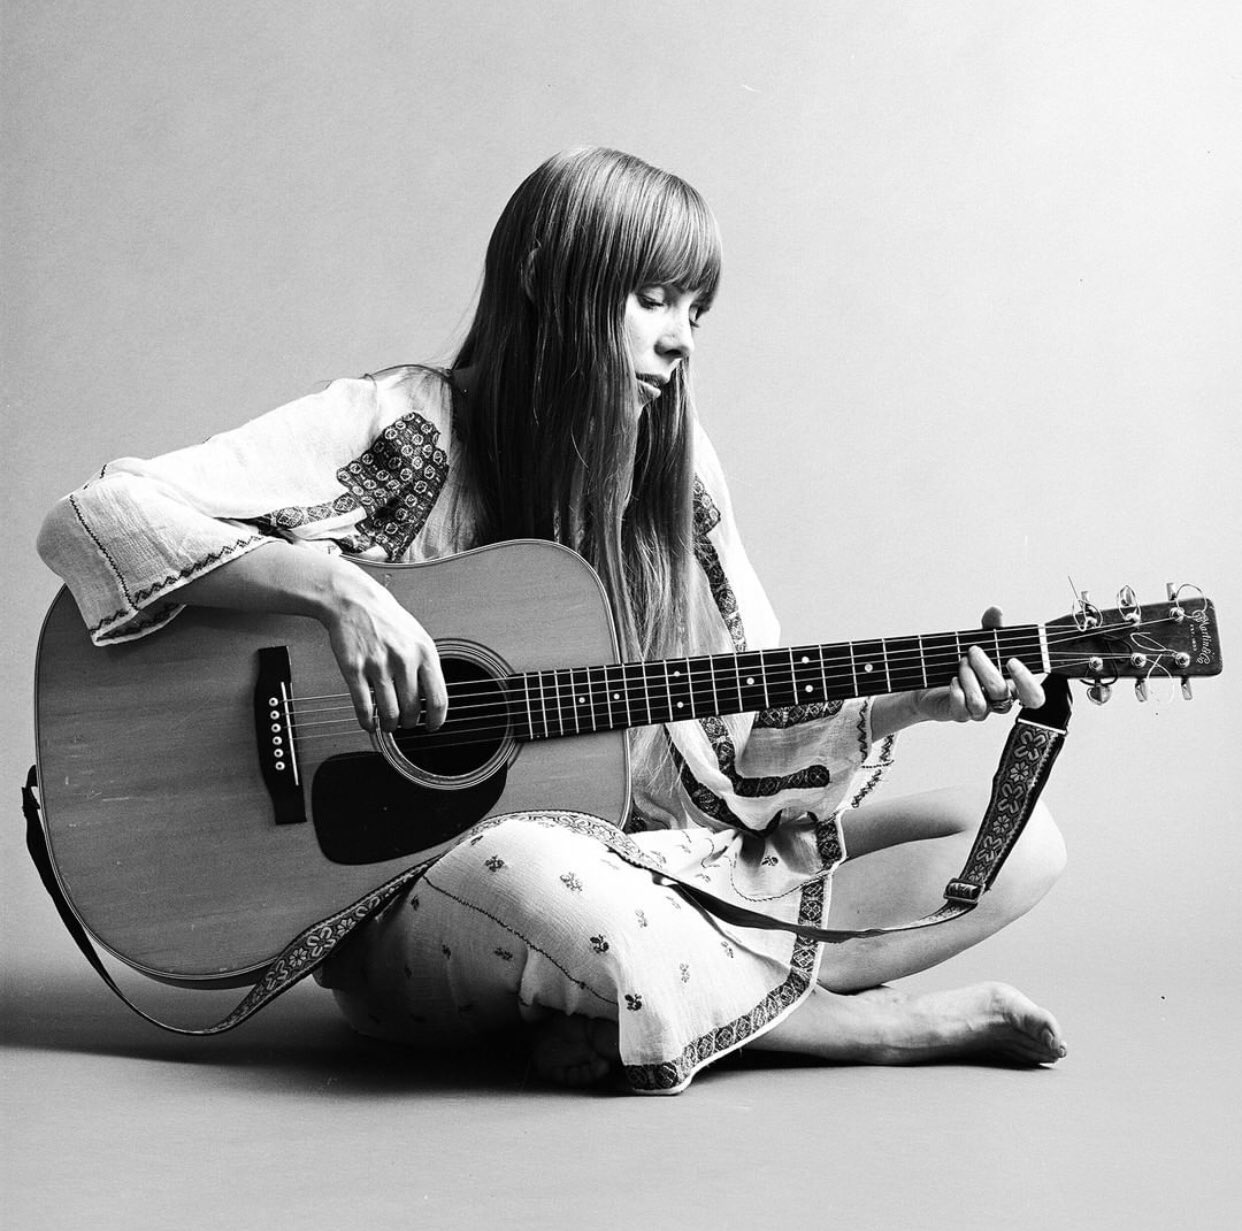 Happy Birthday Joni Mitchell. Her songwriting had such a massive impact on me. Still does. A true artist. 